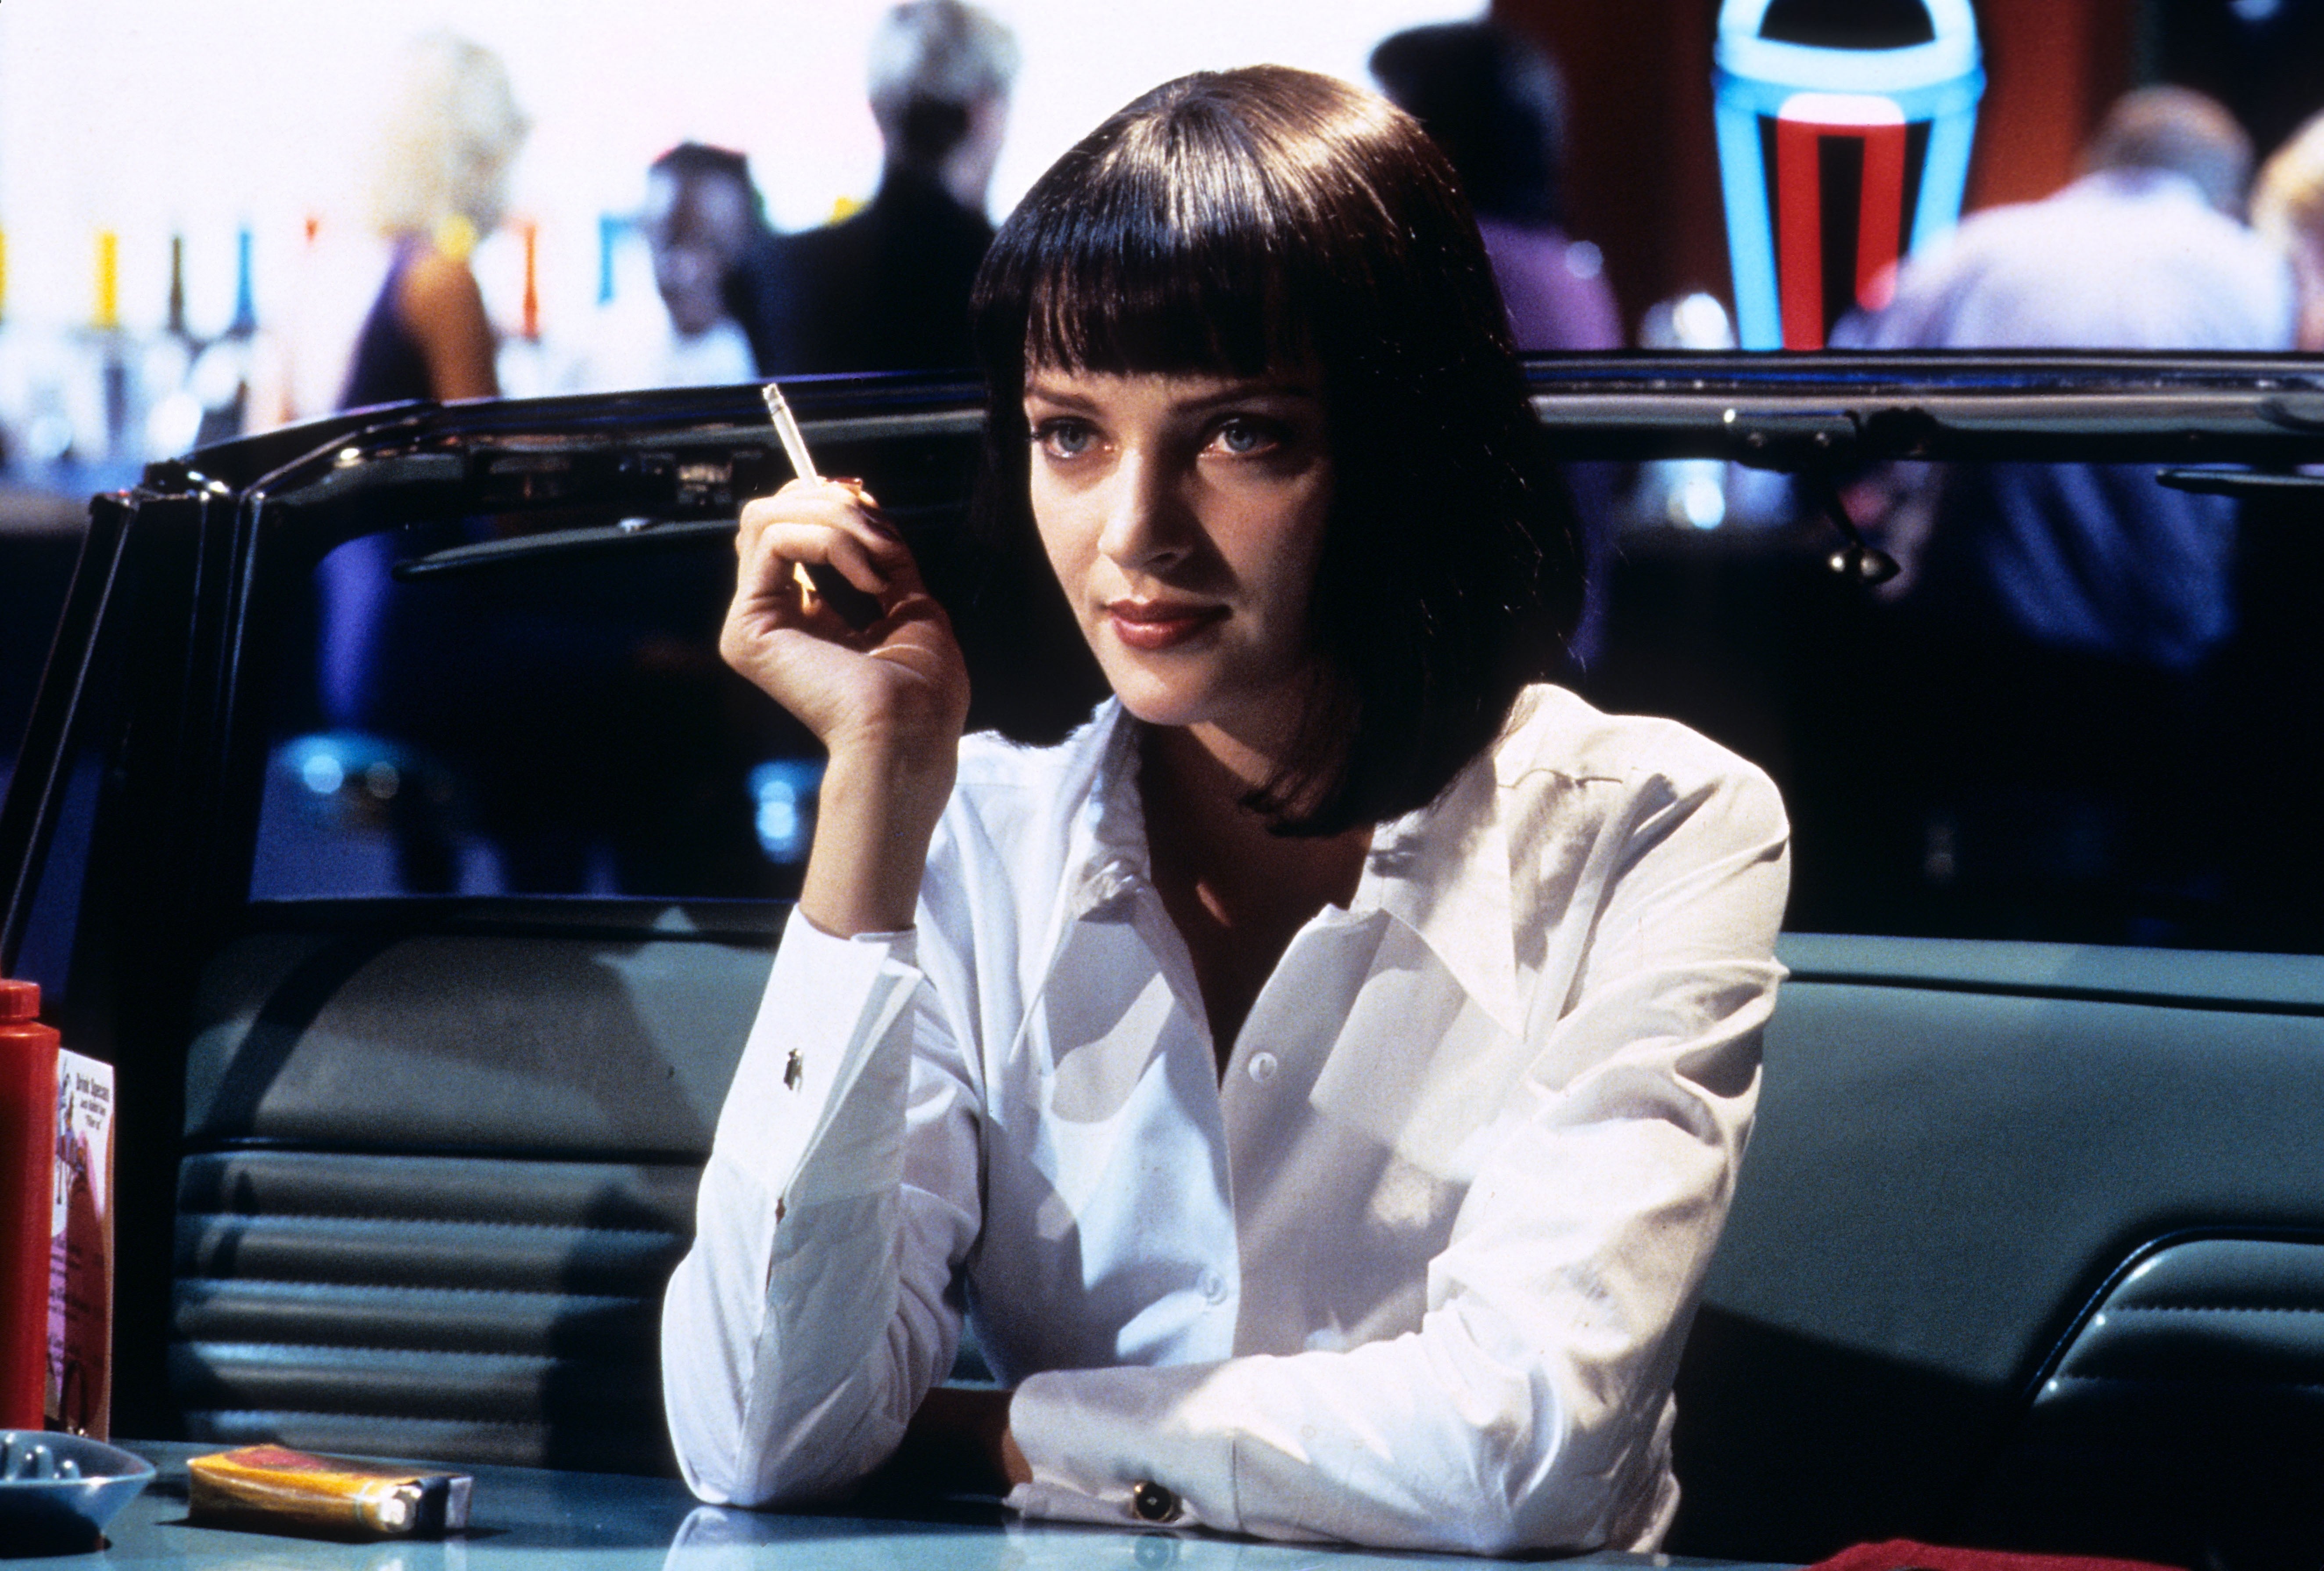 Mia Wallace Pulp Fiction Costume for Women